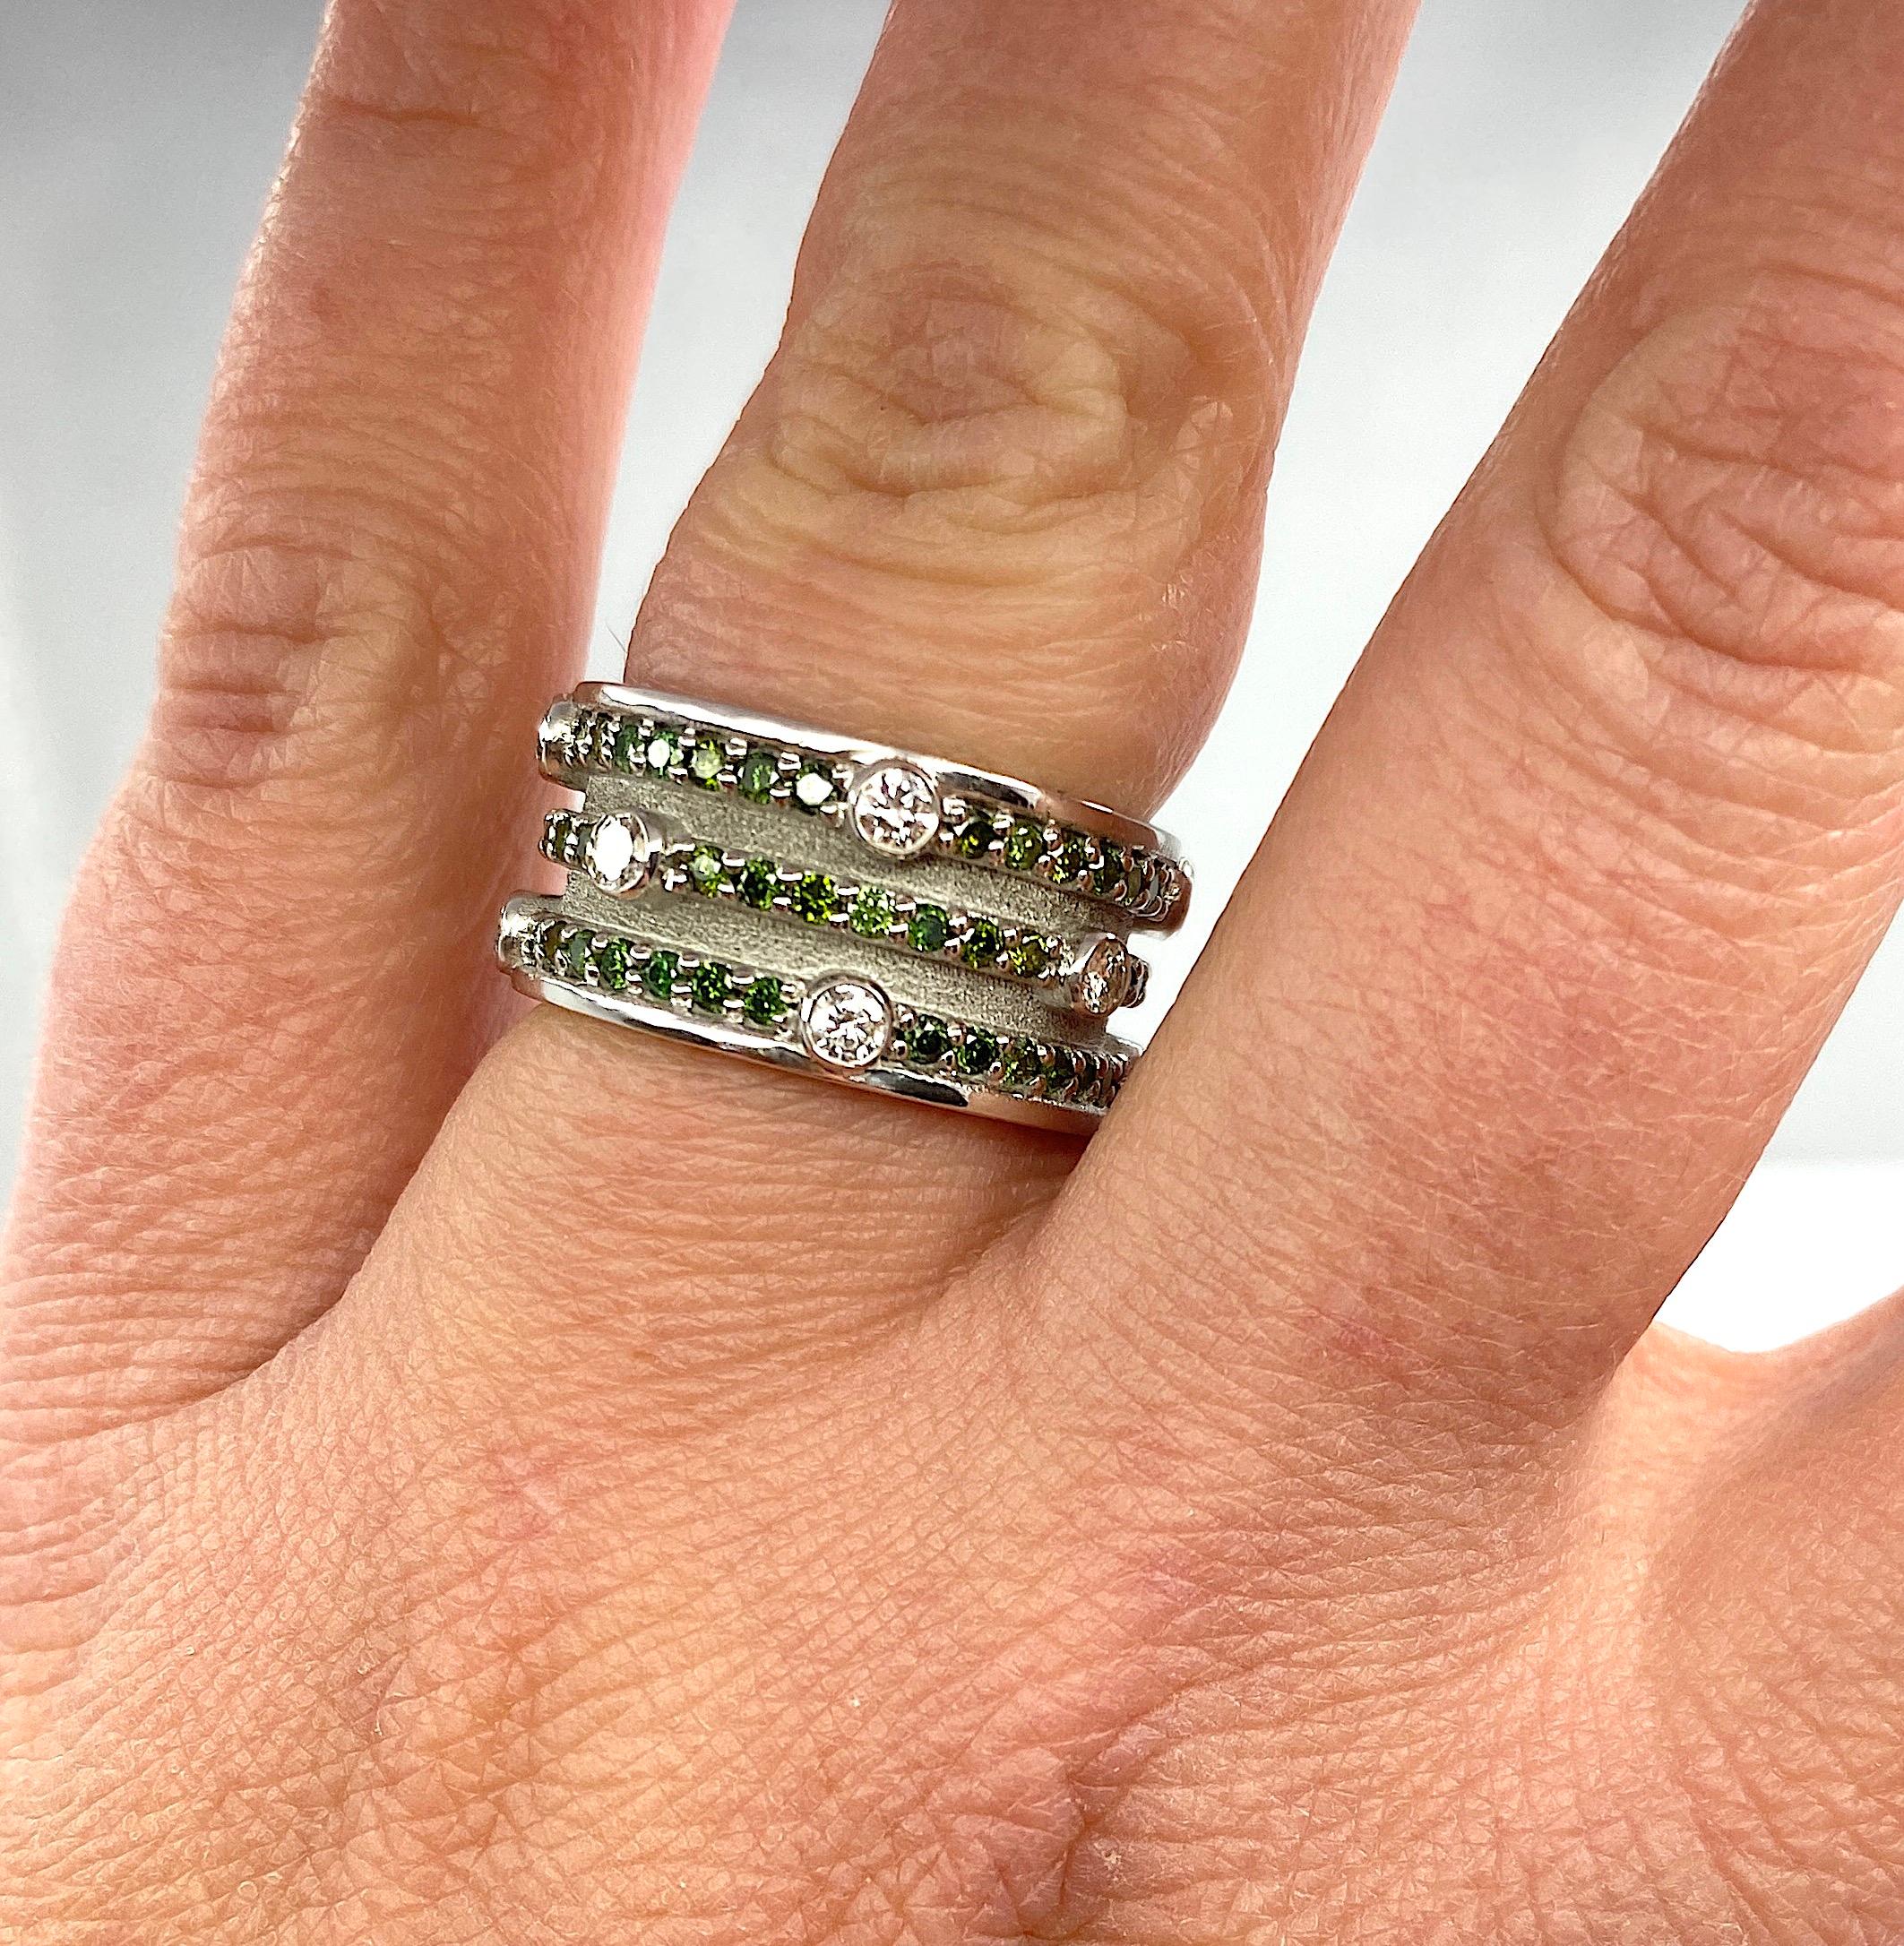 This is an S.Georgios designer 18 Karat Solid White Gold Wide Band Ring all handmade in Greece in an elegant look inspired by the Byzantine era. This ring is heavily decorated with diamonds and would make a gorgeous wedding band. The ring features